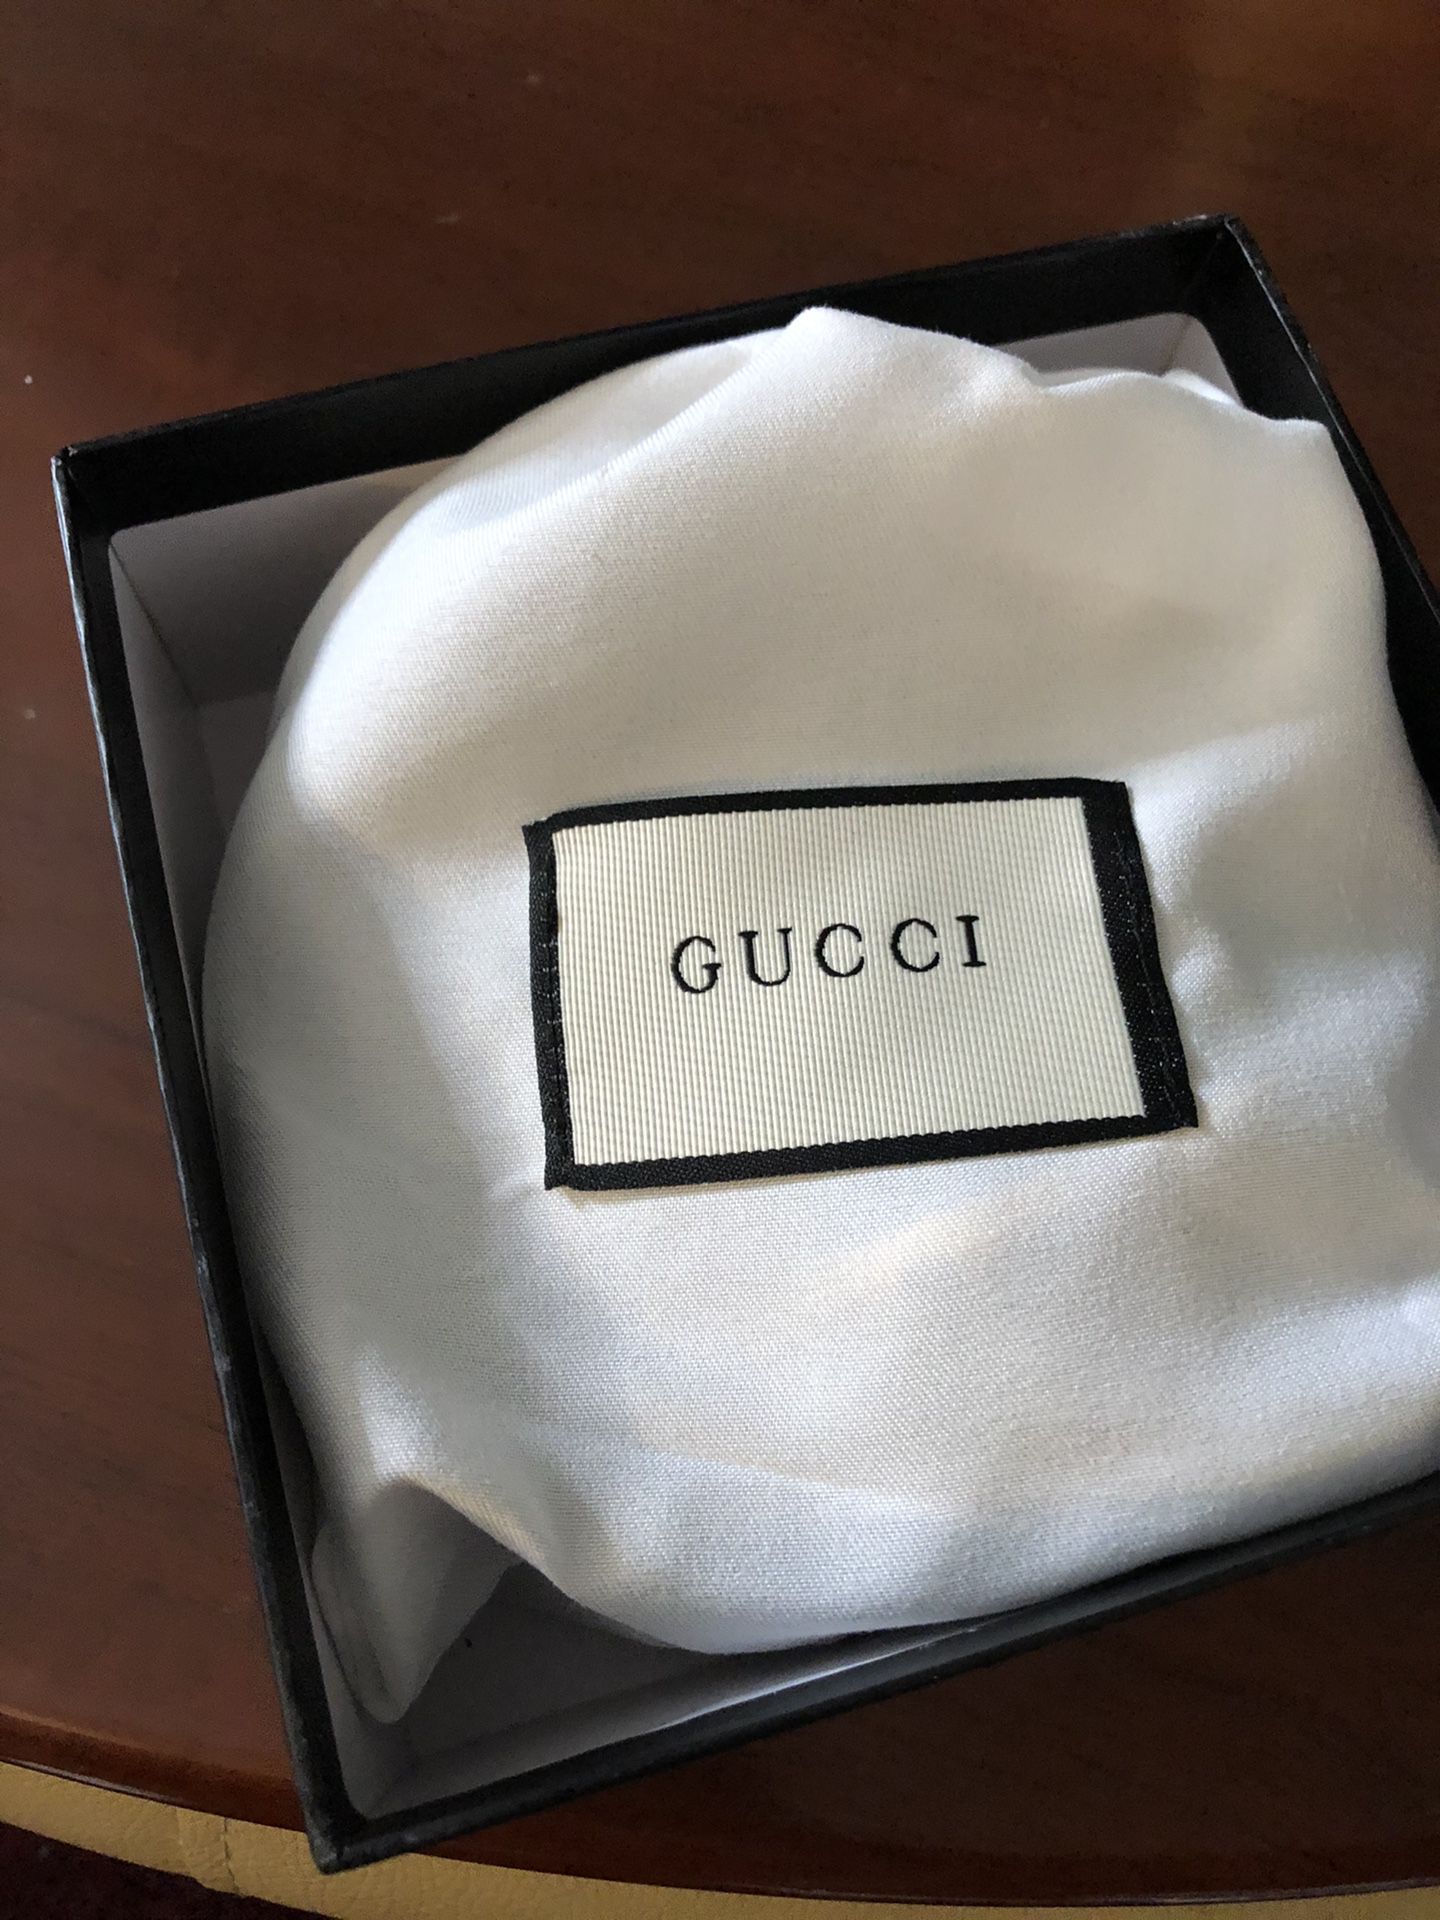 Gucci 411924 KGDHX BLACK SUPREME BELT SIZE 95 cm - 32/34 waist for Sale in  Lake Success, NY - OfferUp